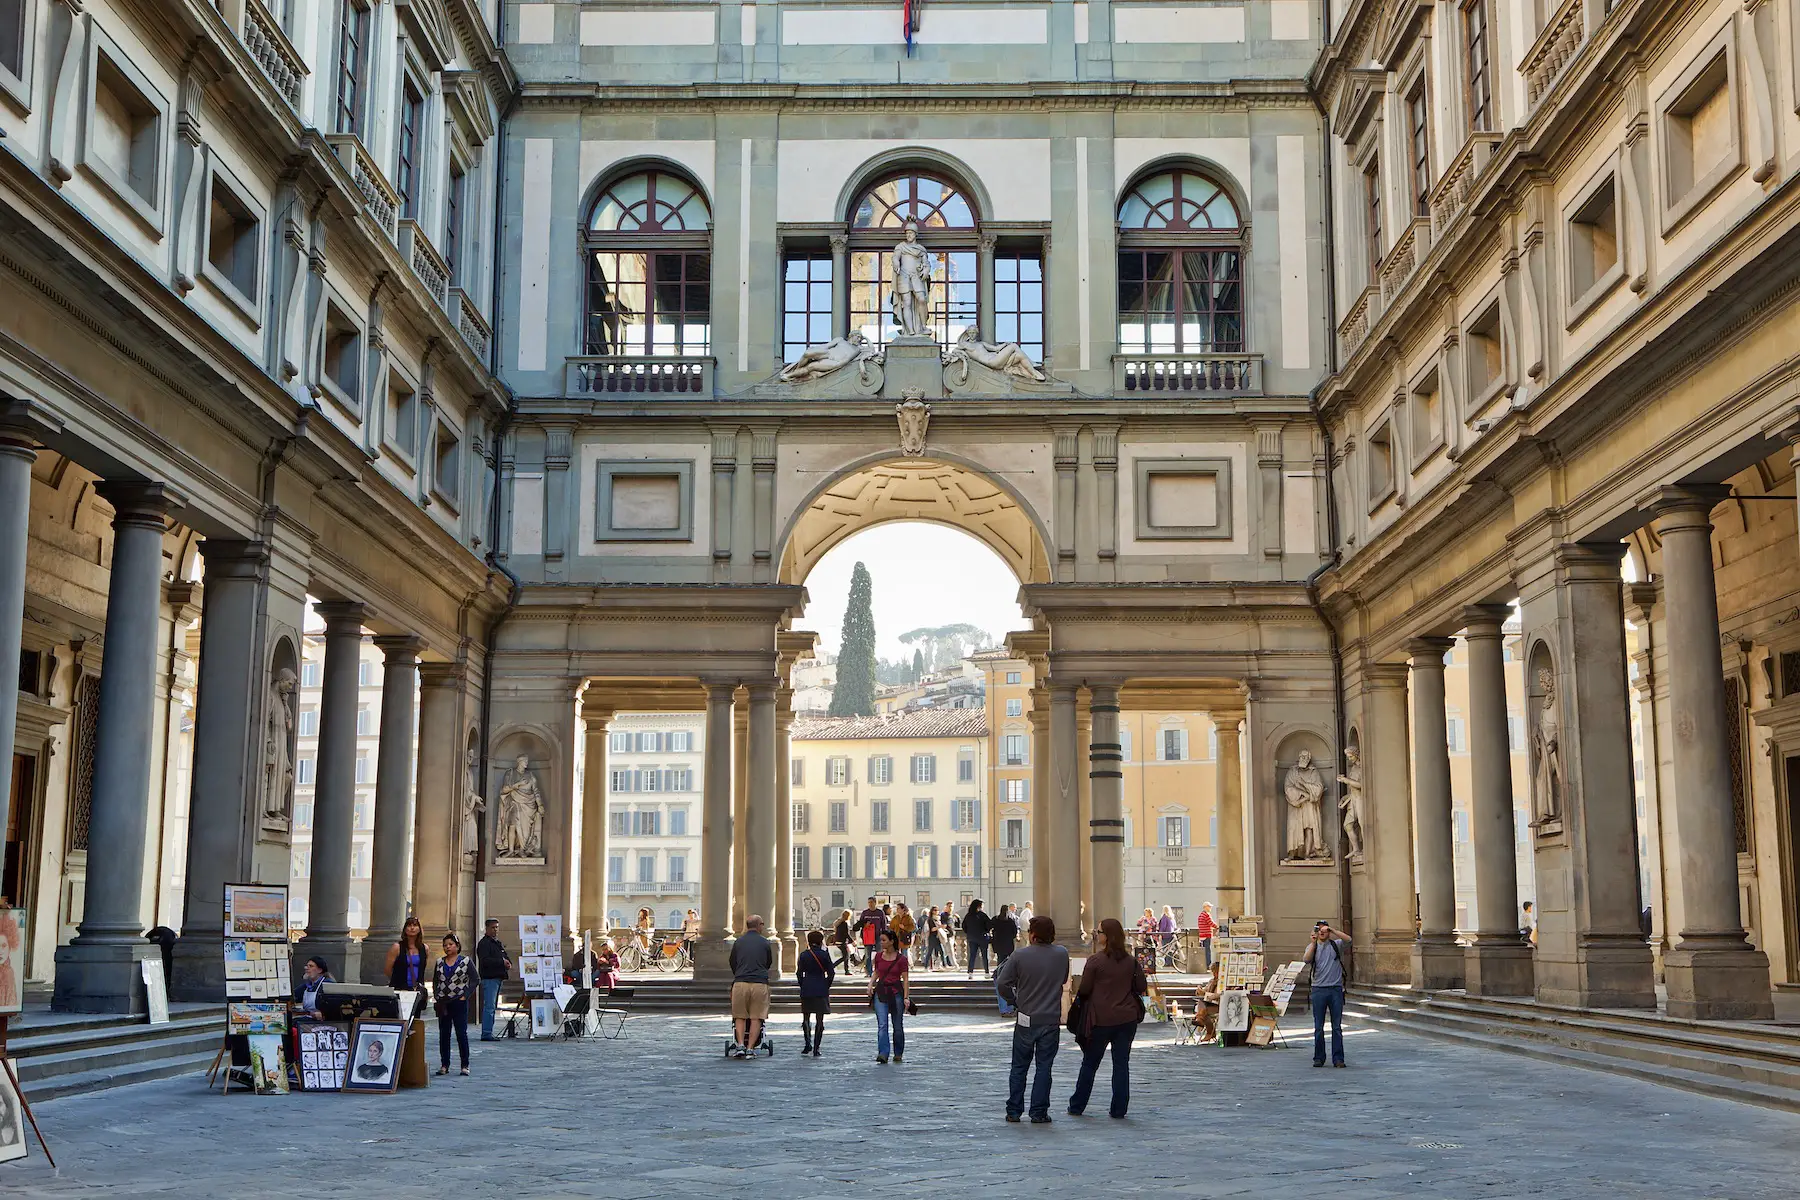 Tourists and art sellers gather in the Vasari Corridor of the Uffizi Gallery, Florence on a sunny day.